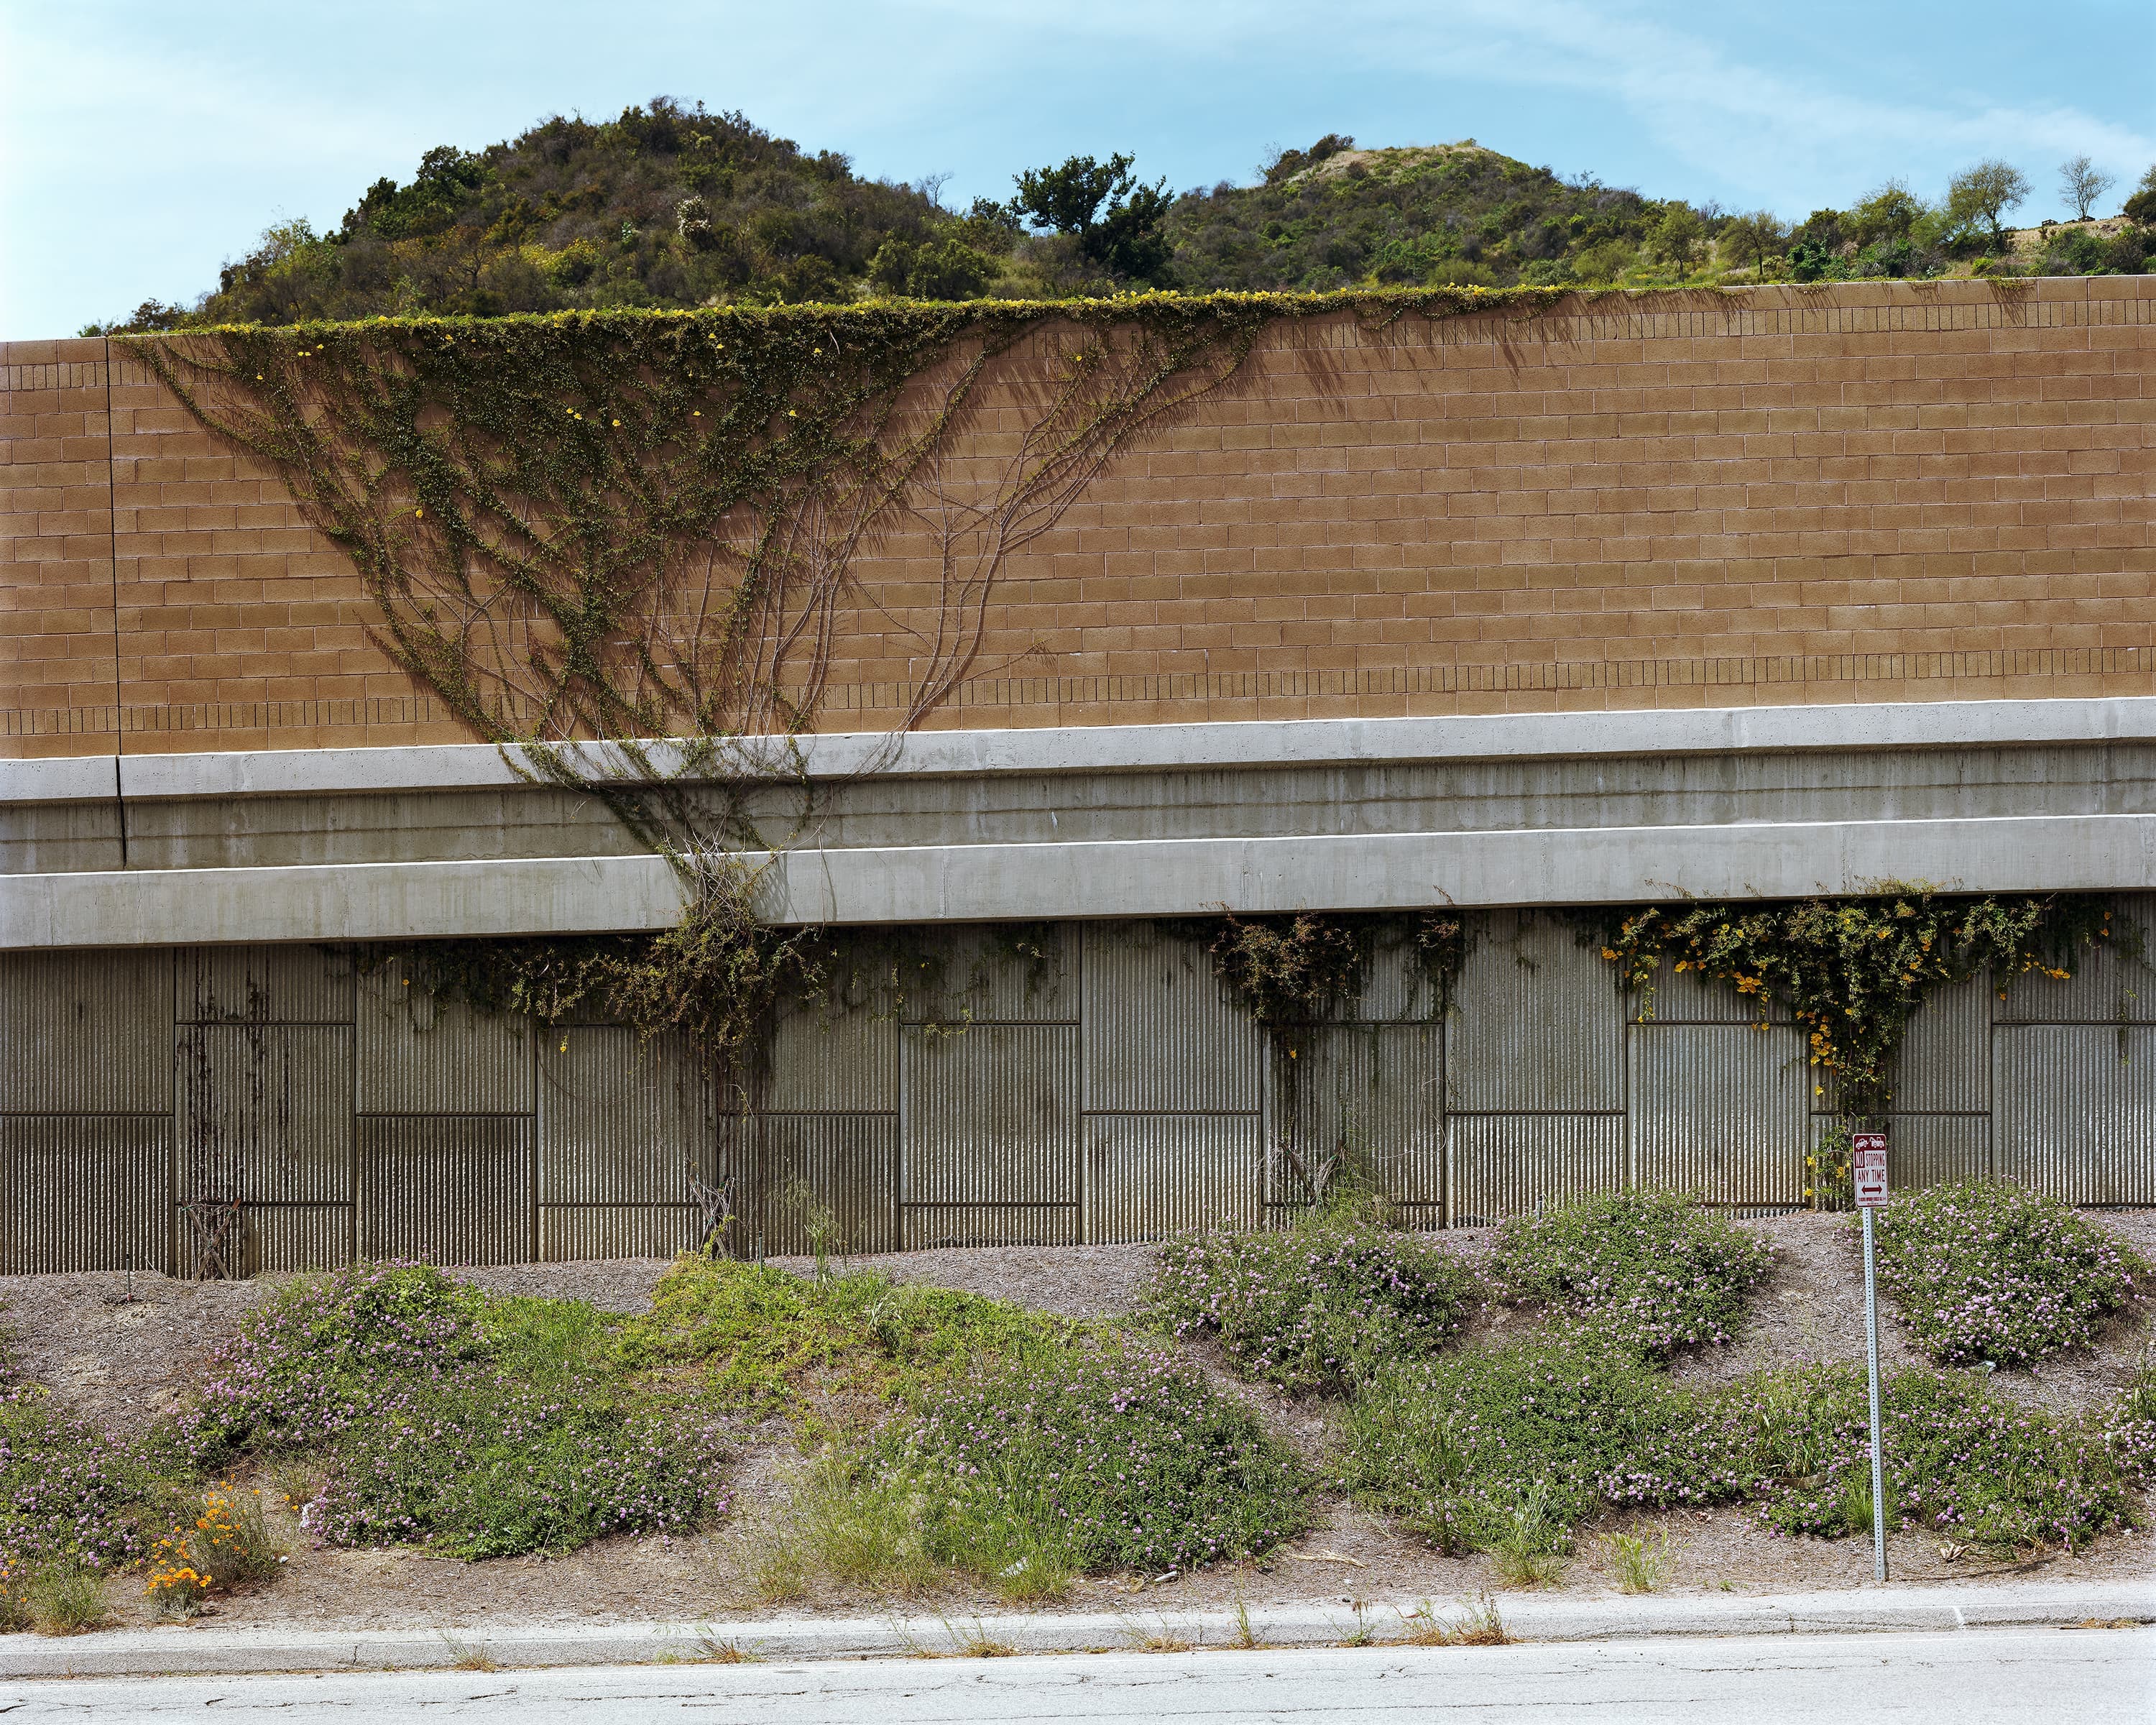 Wildflowers and vines attached to the side of the elevated 405 highway in Los Angeles.